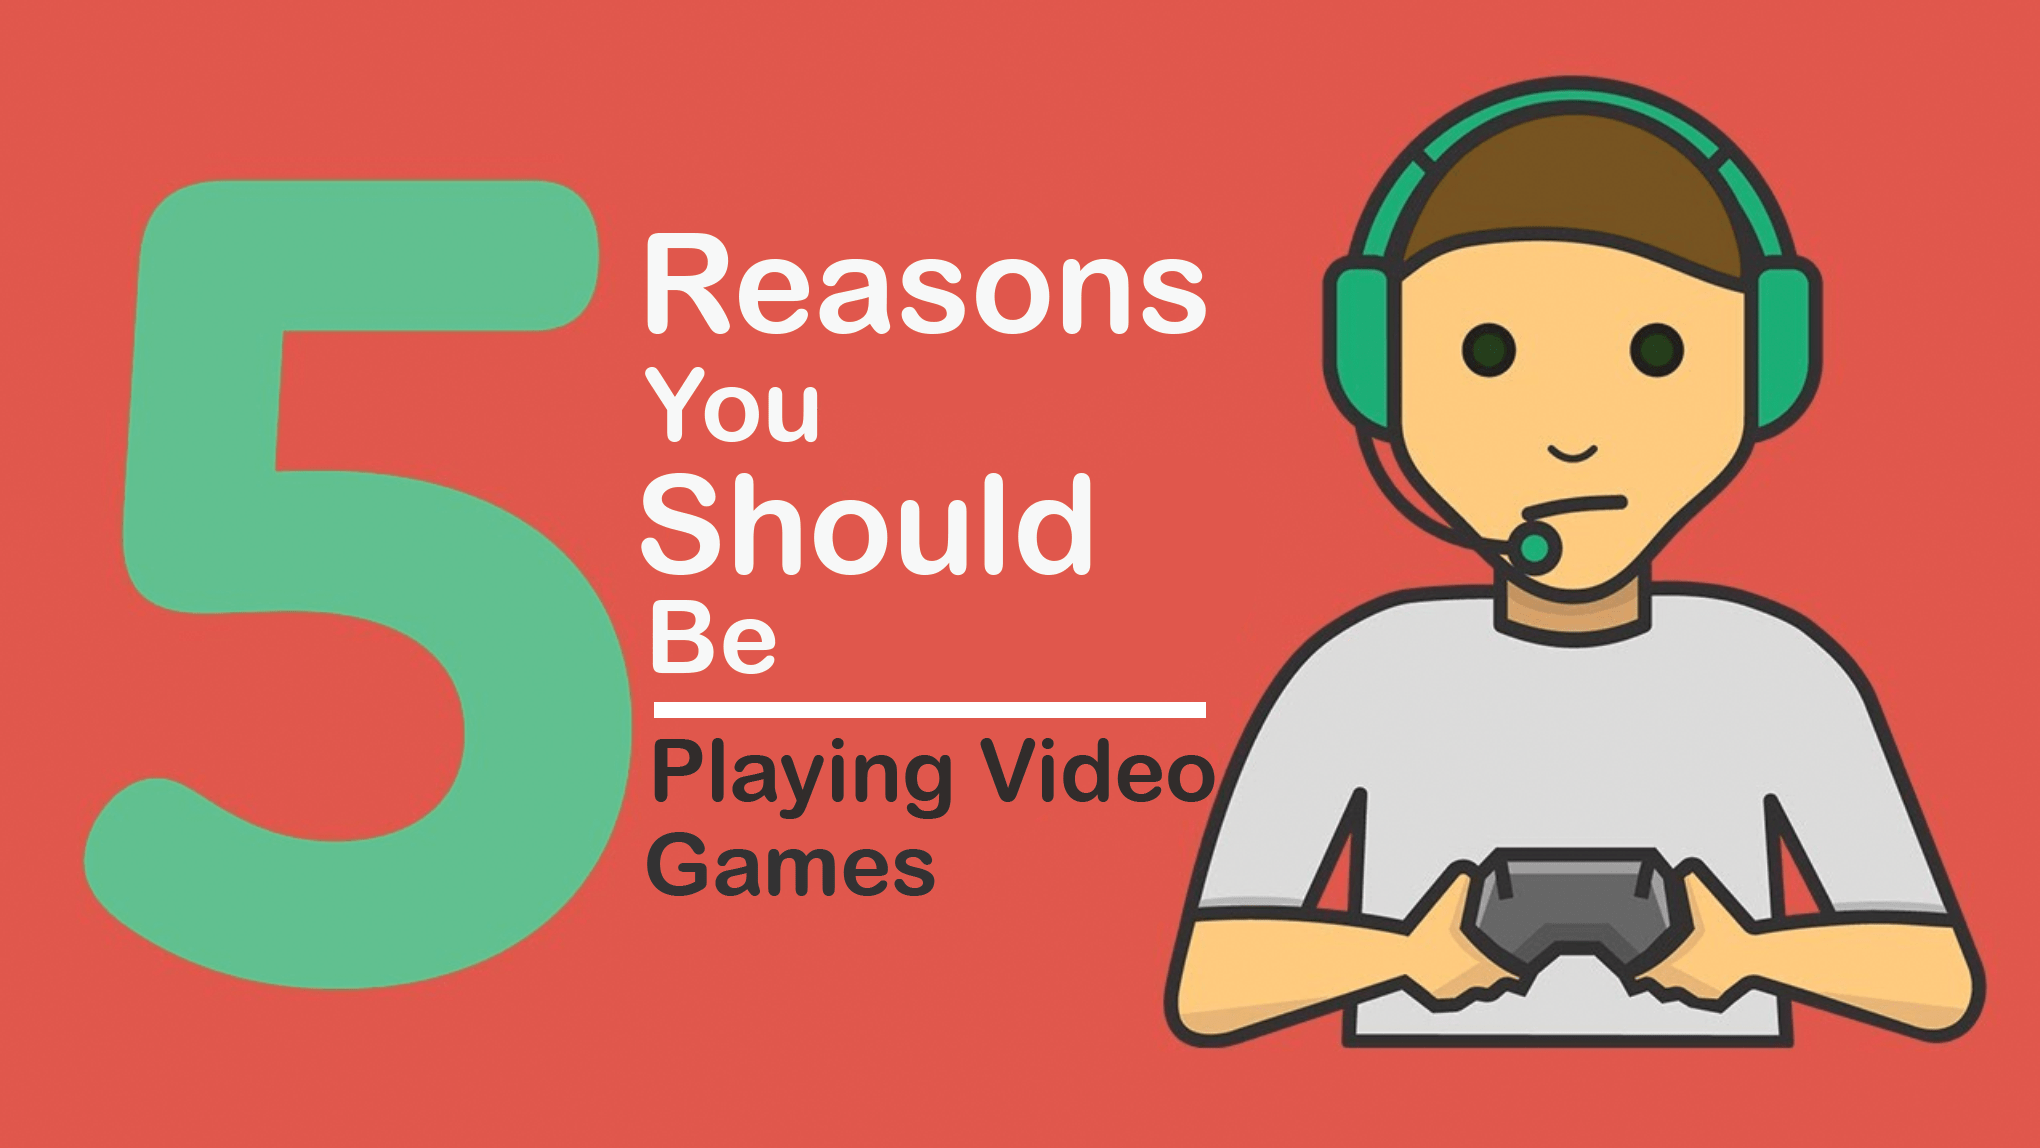 5 Reasons You Should Be Playing Video Games